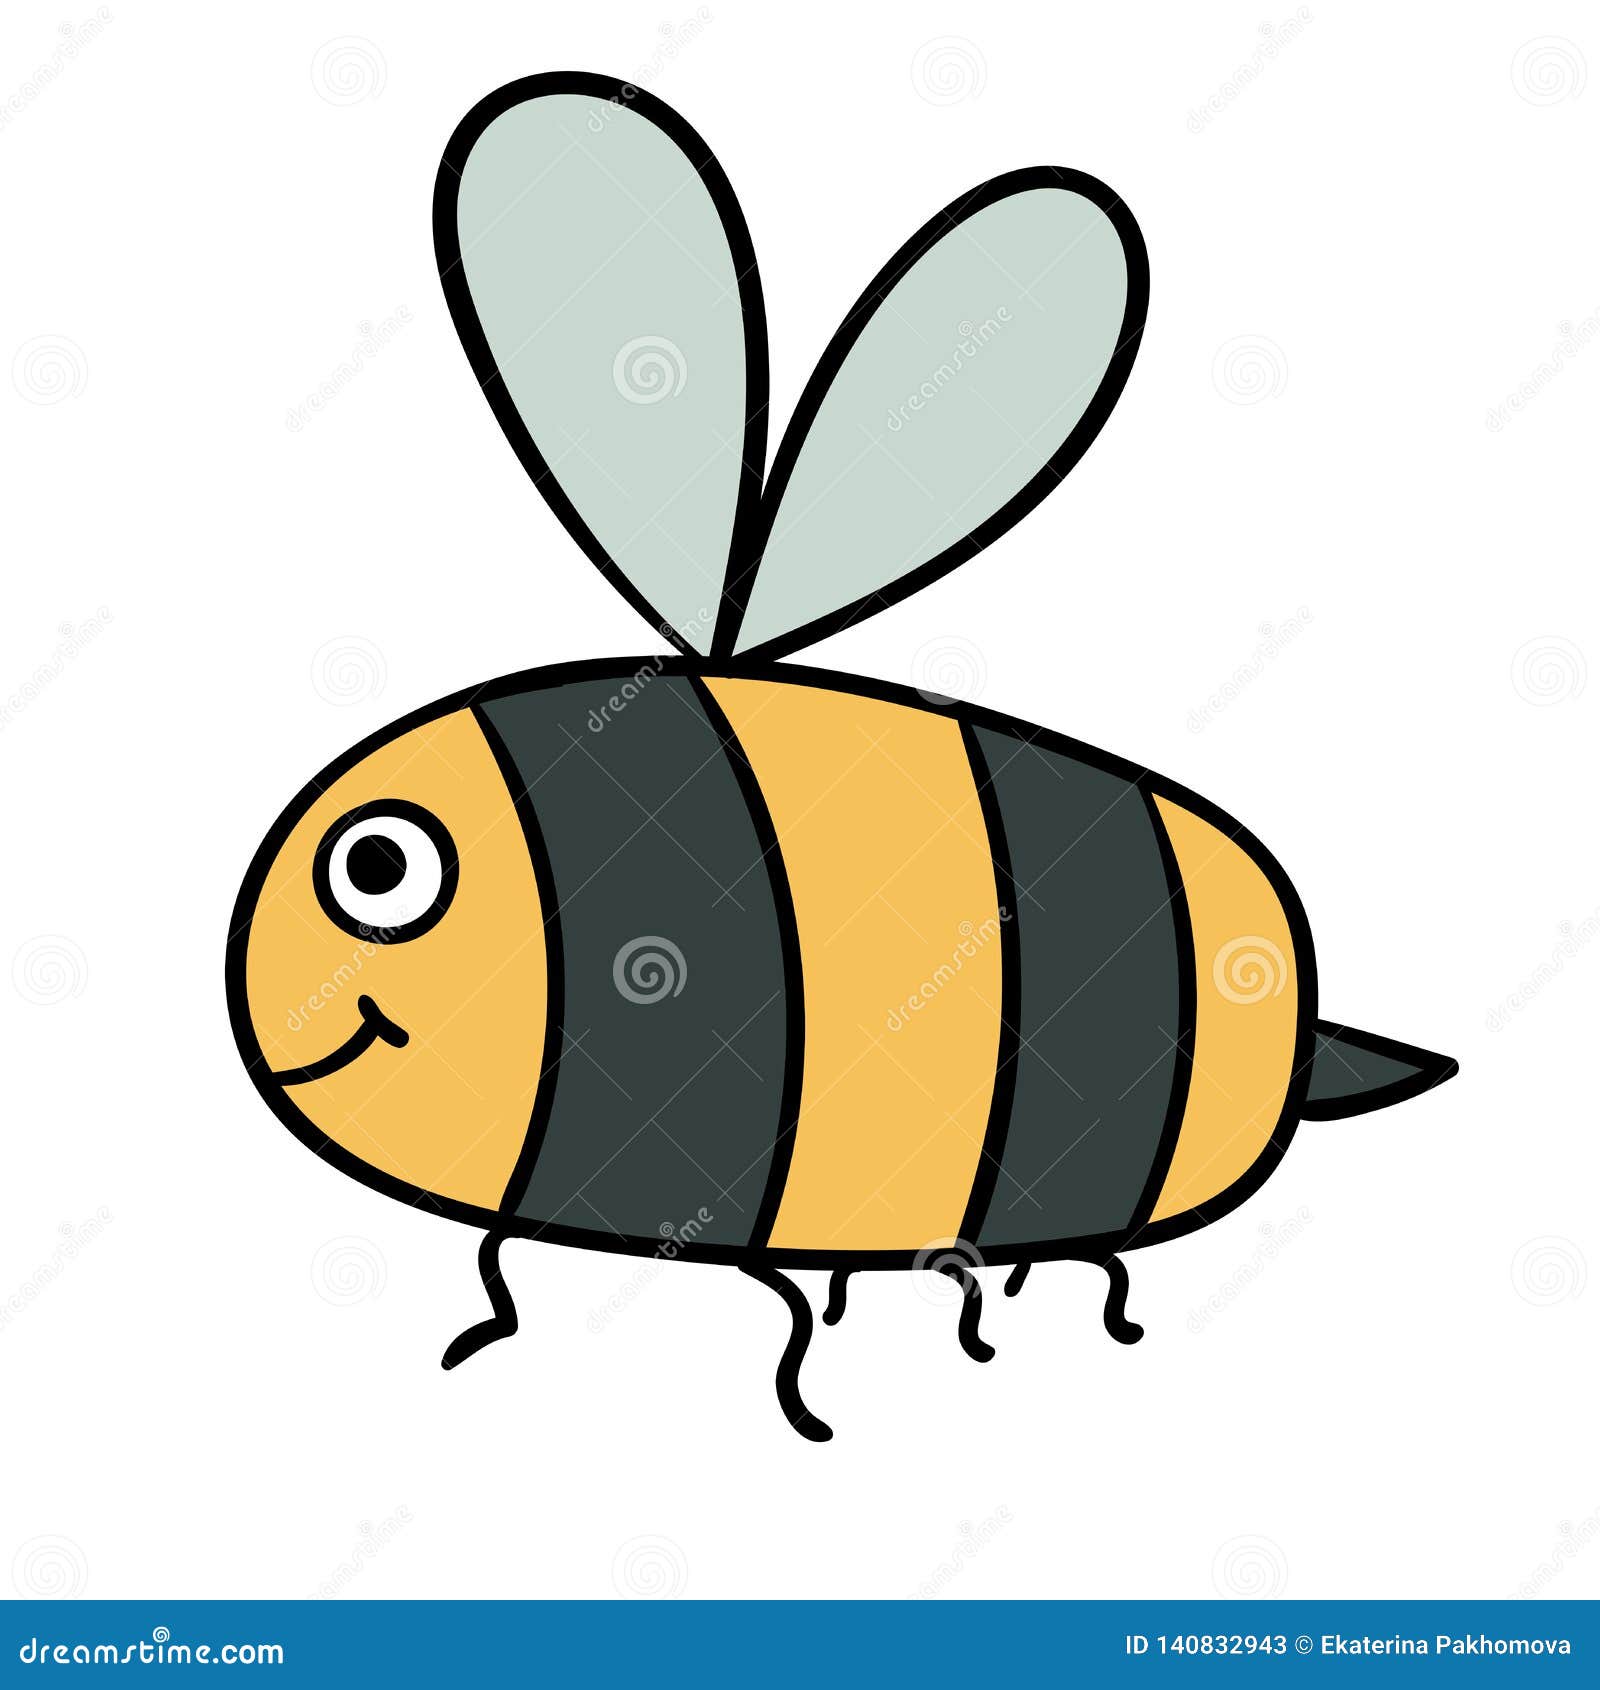 Cute Cartoon Doodle Linear Bee Isolated On White Background. Stock